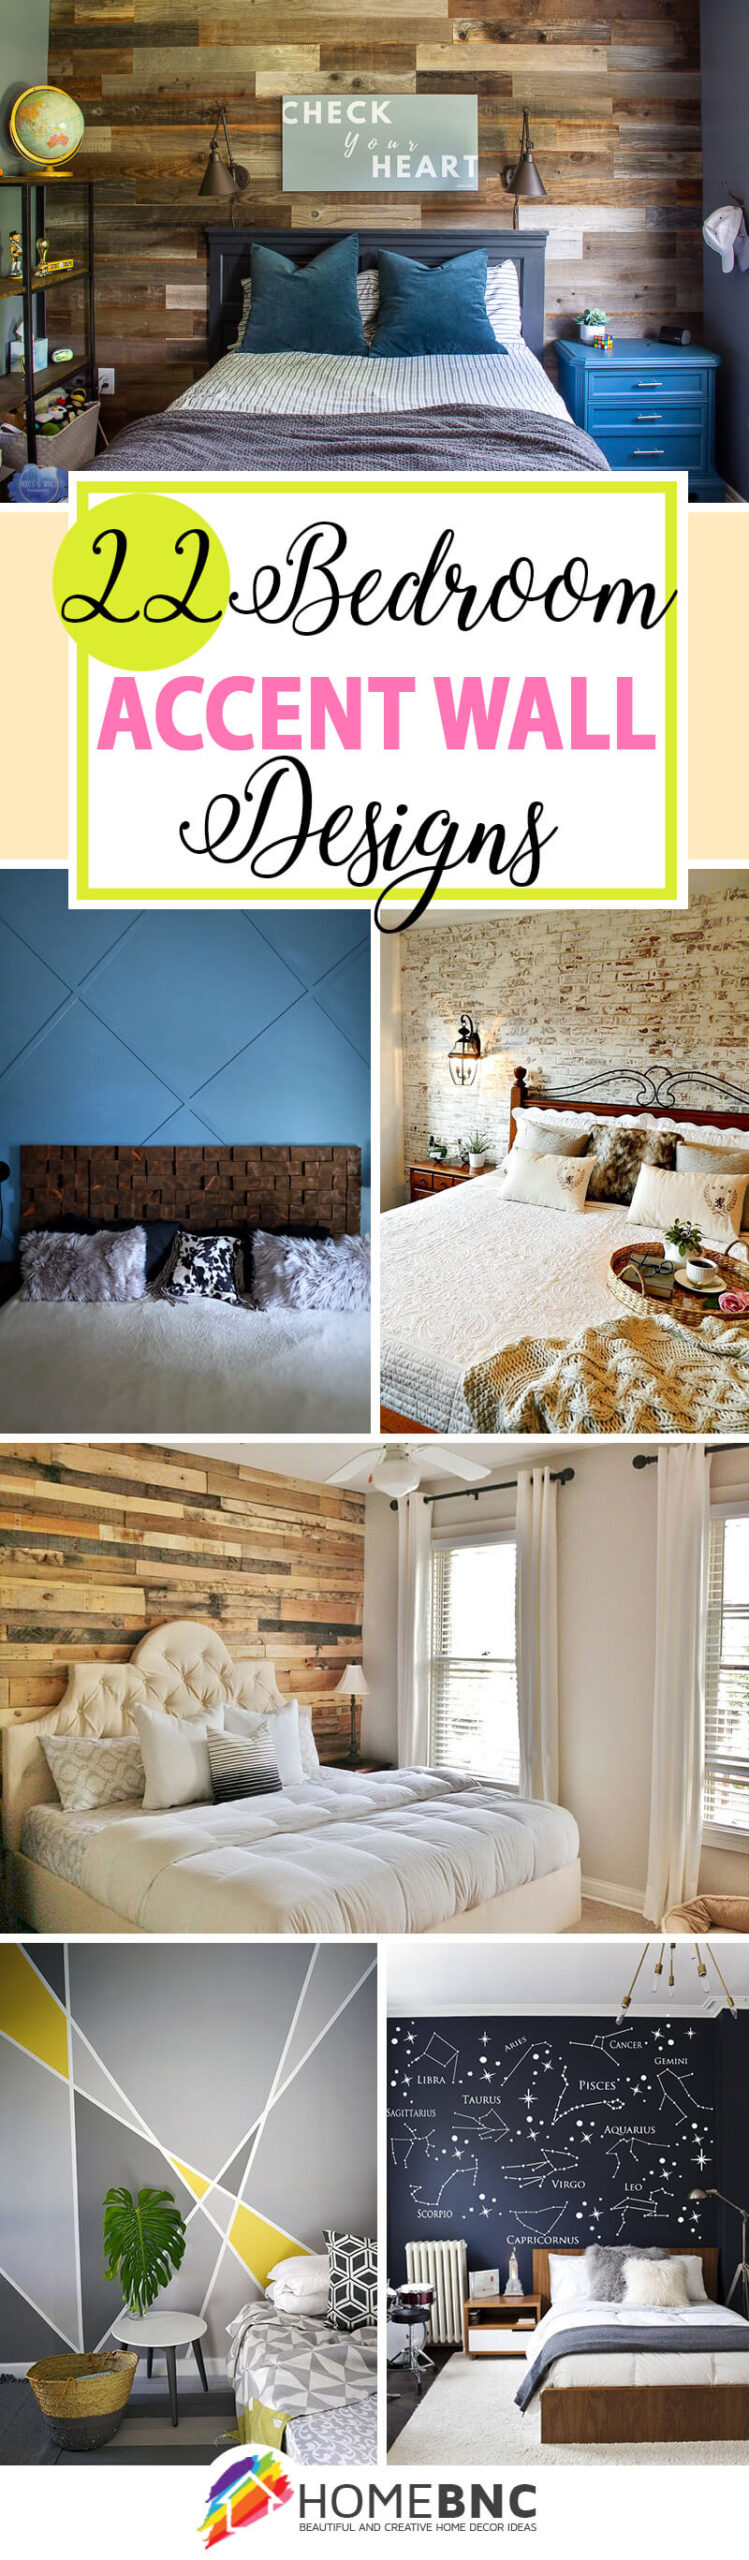 18 Best Bedroom Accent Wall Design Ideas to Update Your Space in 18